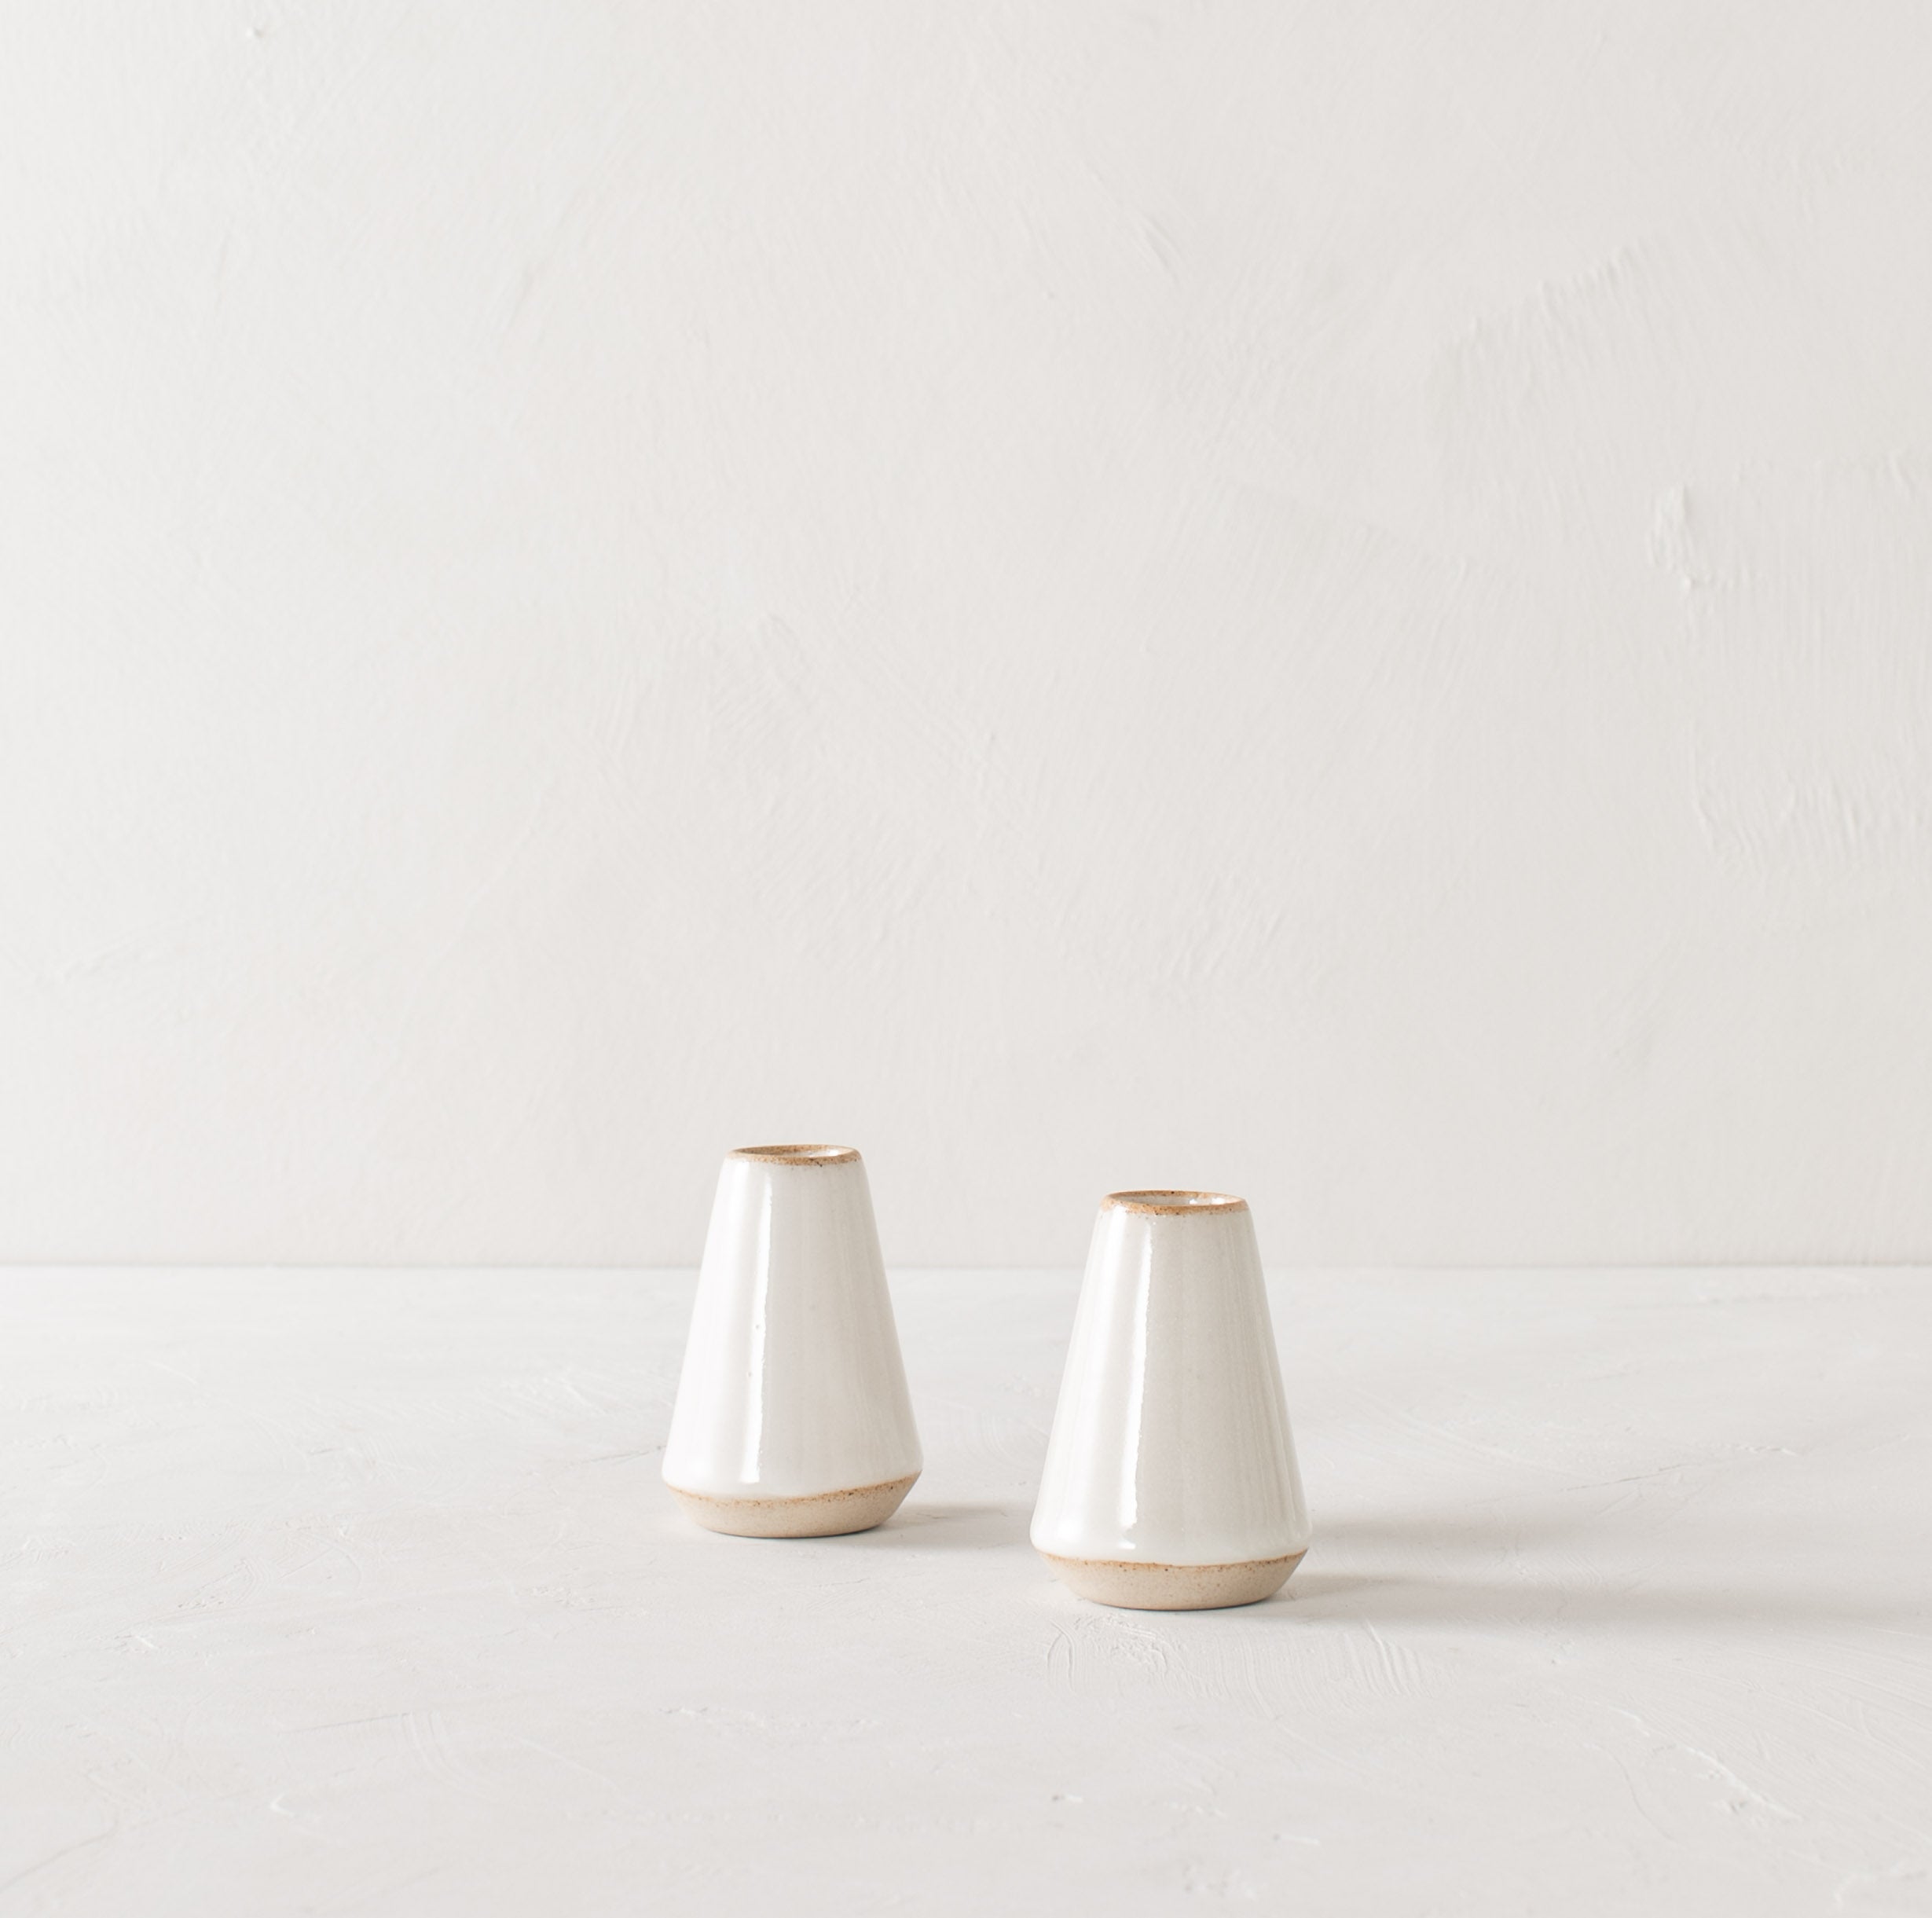 Two minimal white 4 inch tapered bud vase. White glazed with an exposes stoneware rim and base. Both upright side by side on a white plaster textured tabletop and white textured back drop. Handmade ceramic bud vase designed and sold by Convivial Production, Kansas City Ceramics.